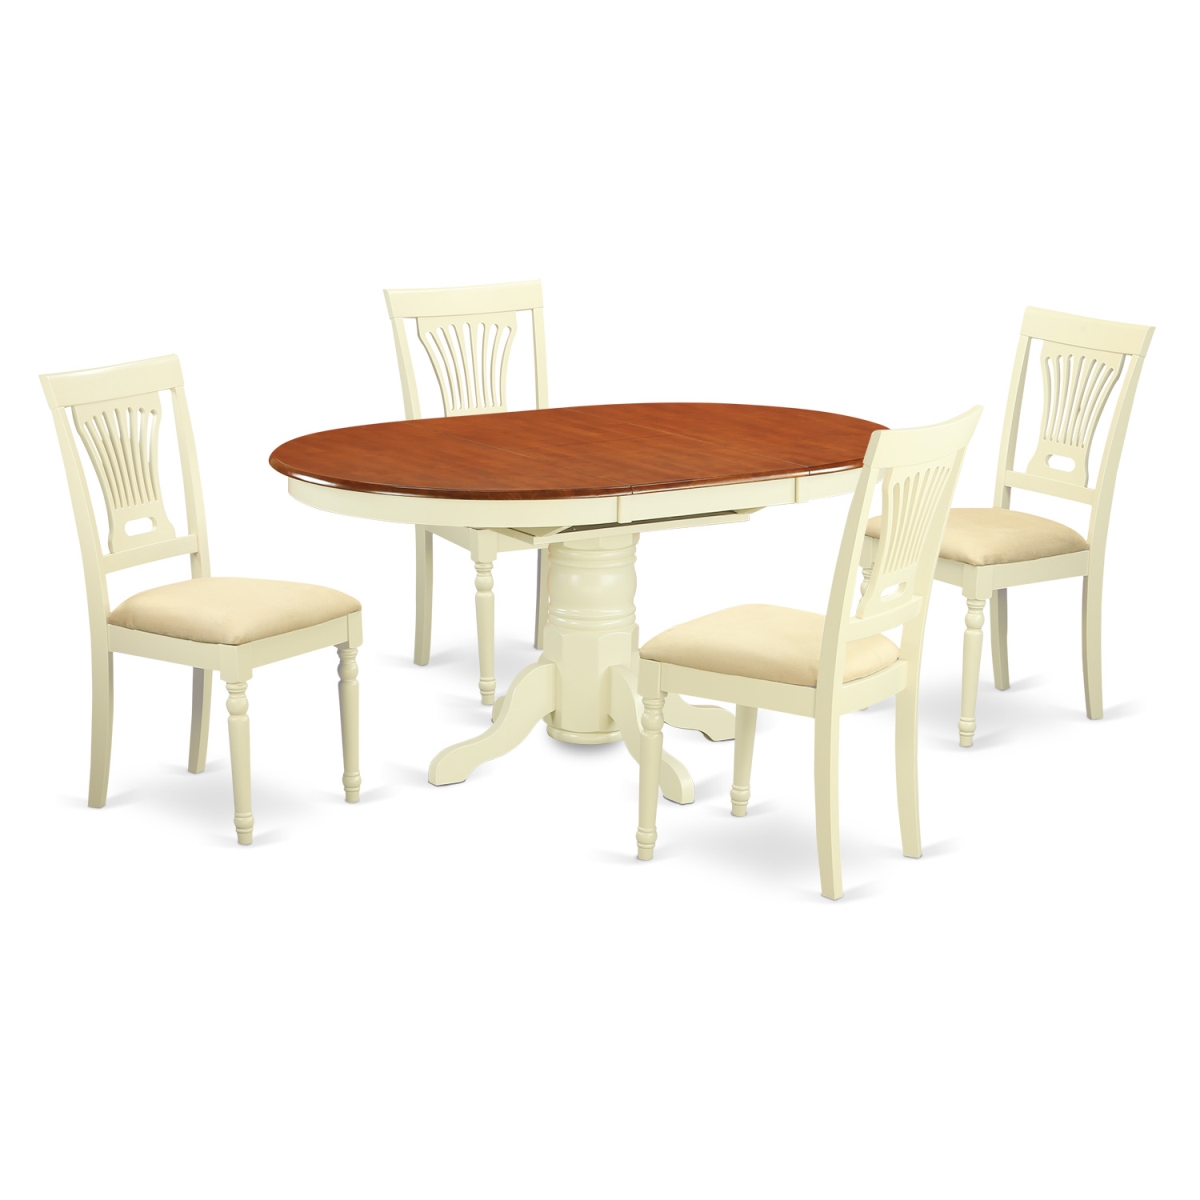 Picture of East West Furniture AVPL5-WHI-C Microfiber Dinette Set - Table & 4 Chairs, Buttermilk & Cherry - 5 Piece